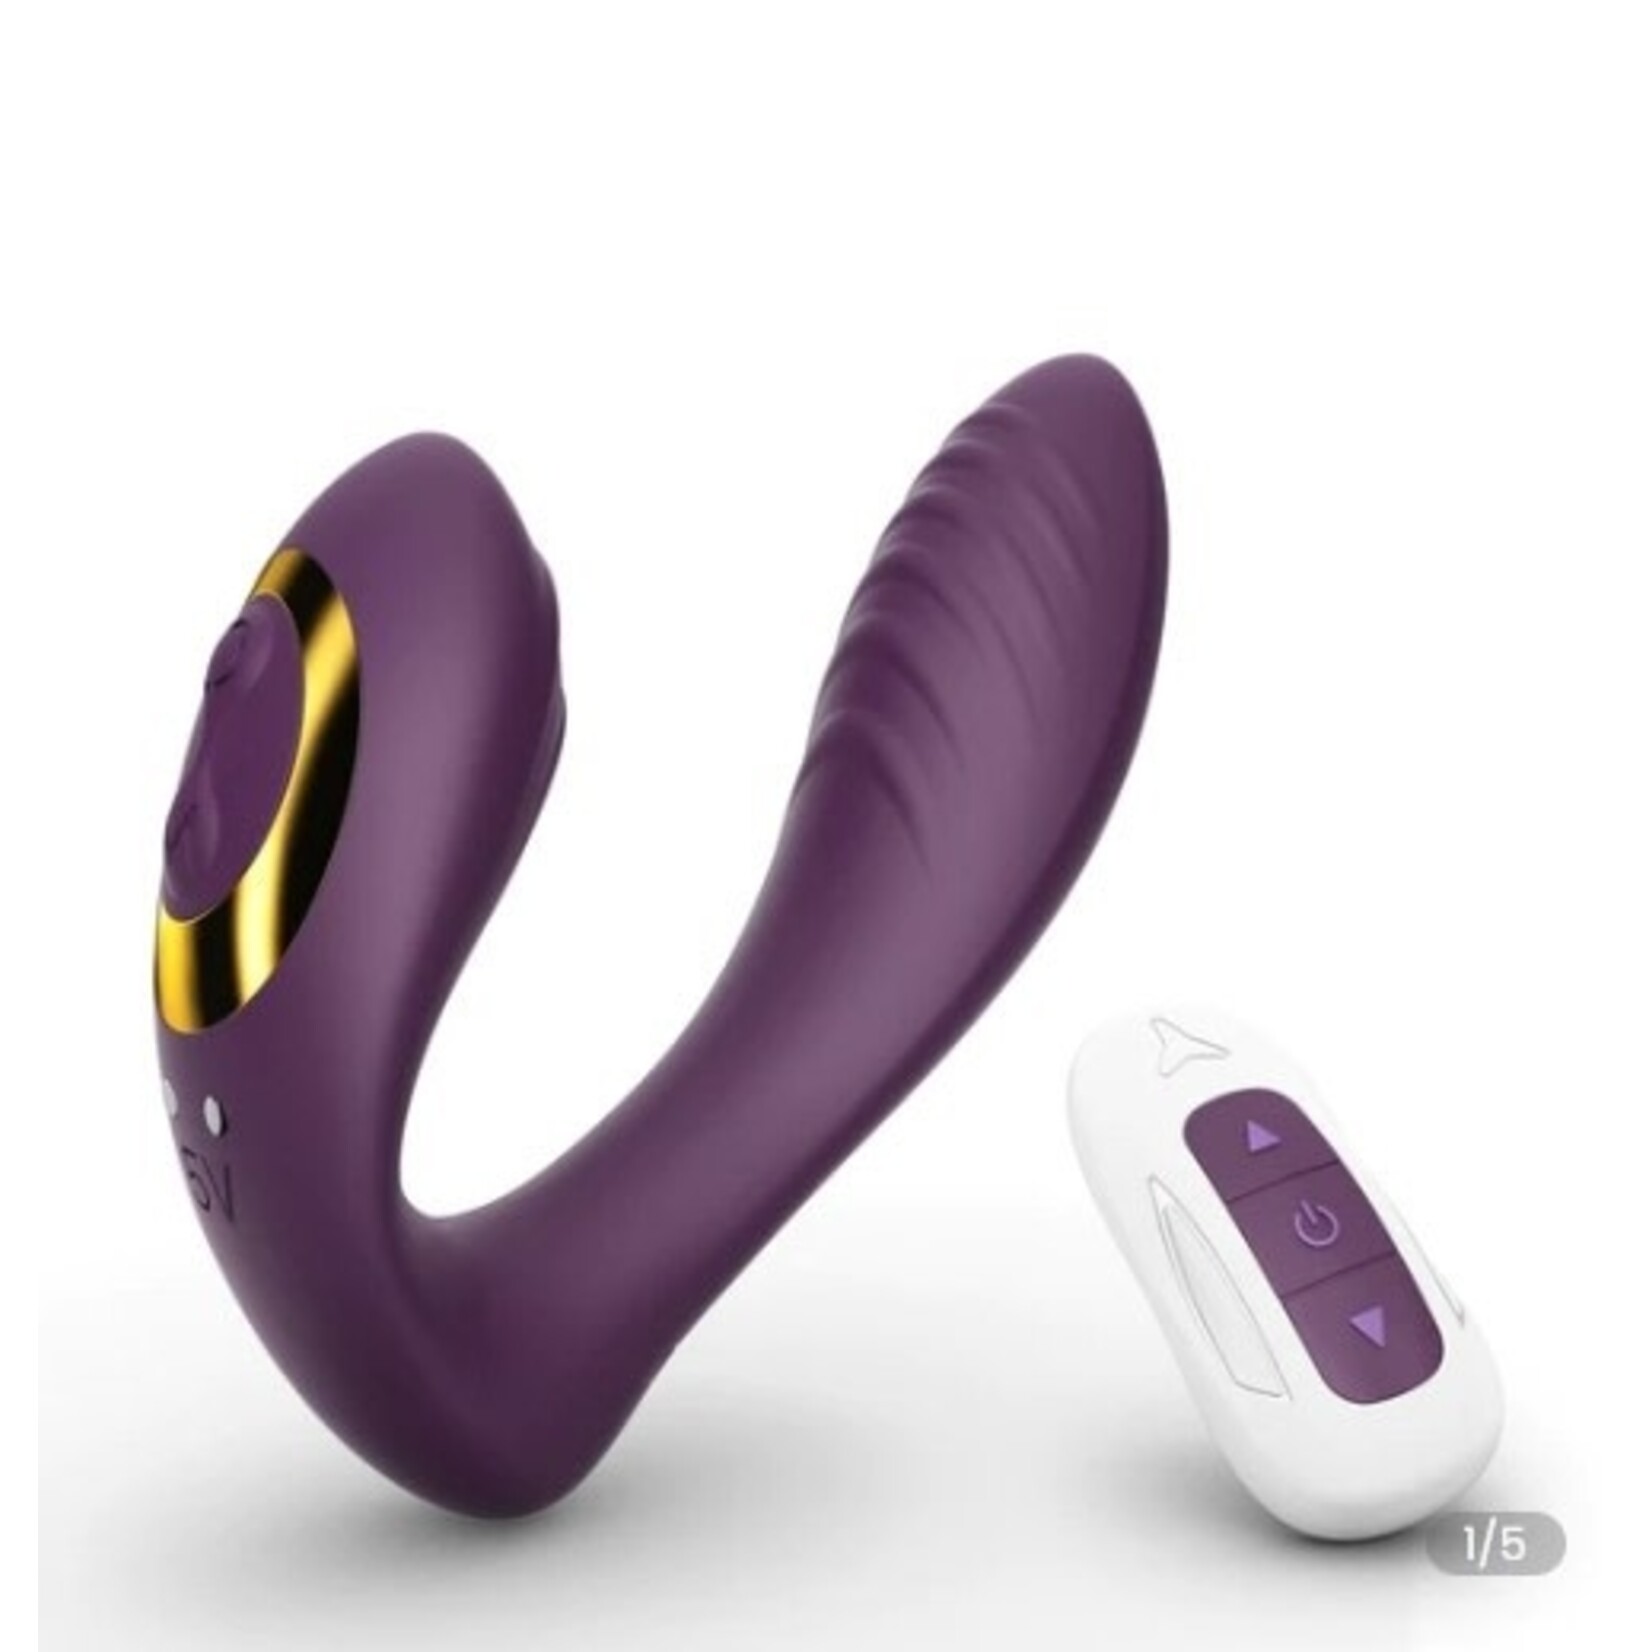 TRACY'S DOG TRACY'S DOG - WEARABLE PANTY VIBRATOR WITH ROMOTE CONTROL